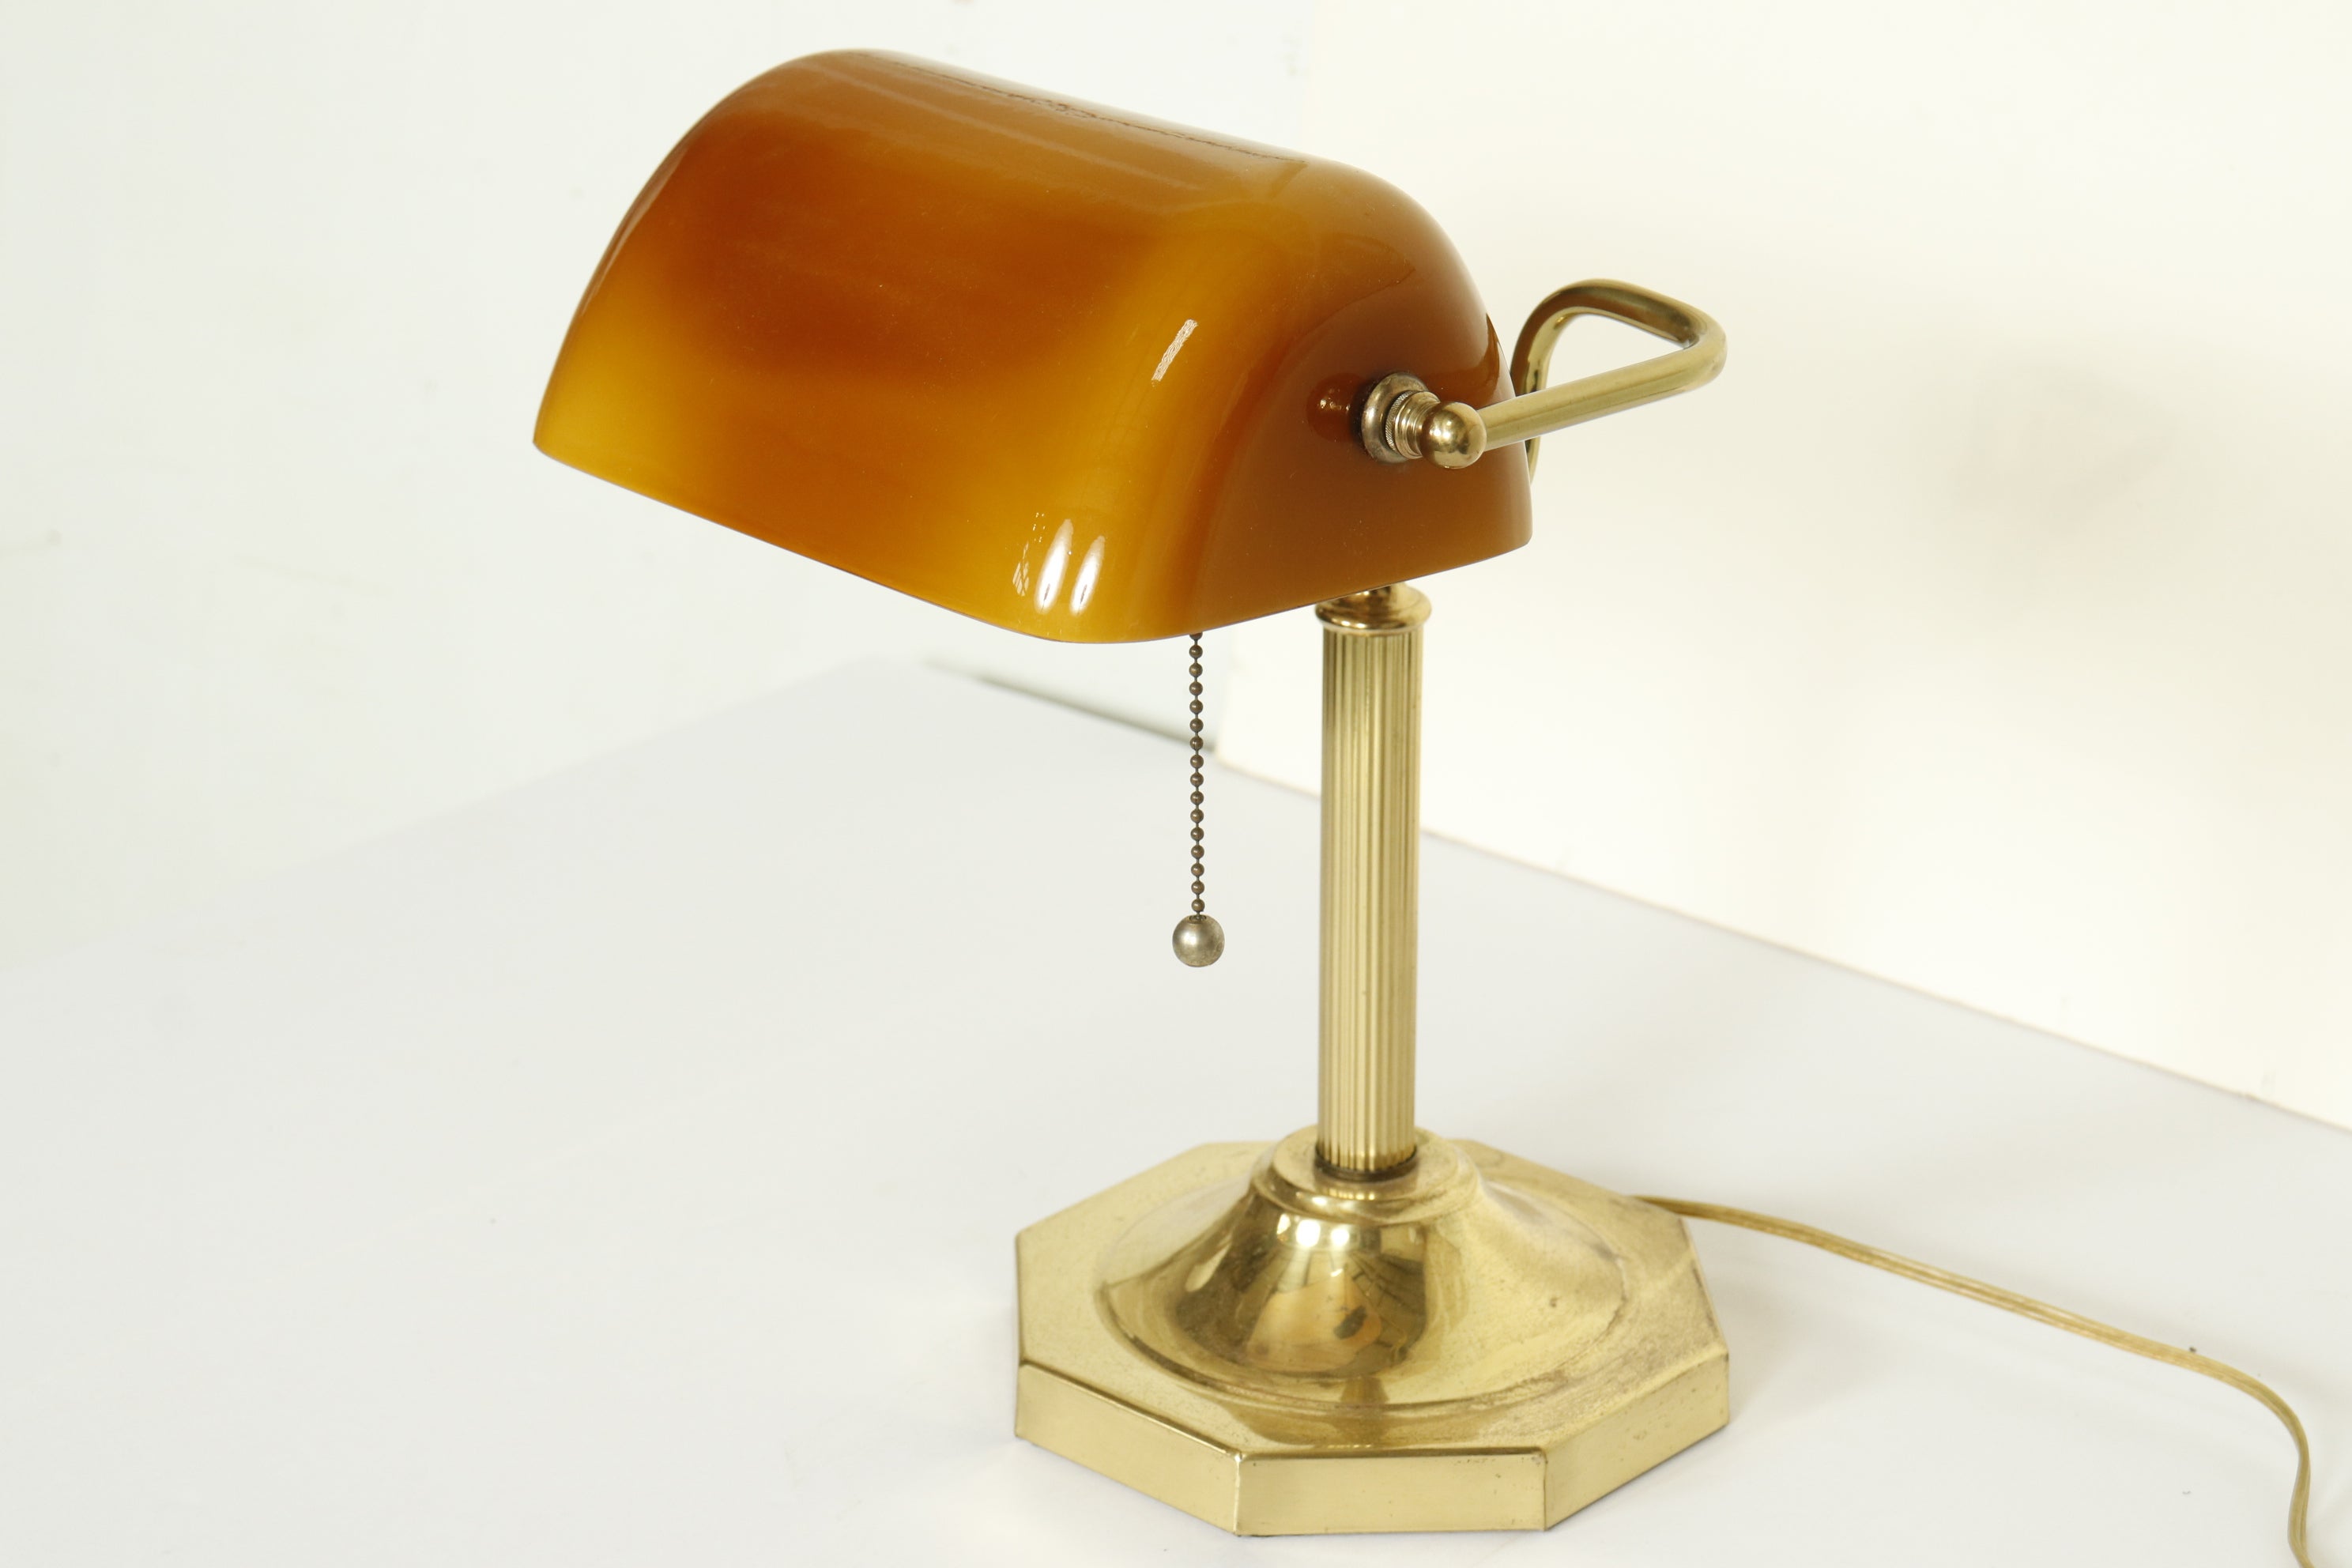 A classic bankers lamp with a unique amber-colored glass shade.

Features:
*Polished brass base
*Adjustable shade
*UL Listed
*Wired for US use
*Takes one standard base bulb

Dimensions: 14.5” H x 7.5” W x 4” D.